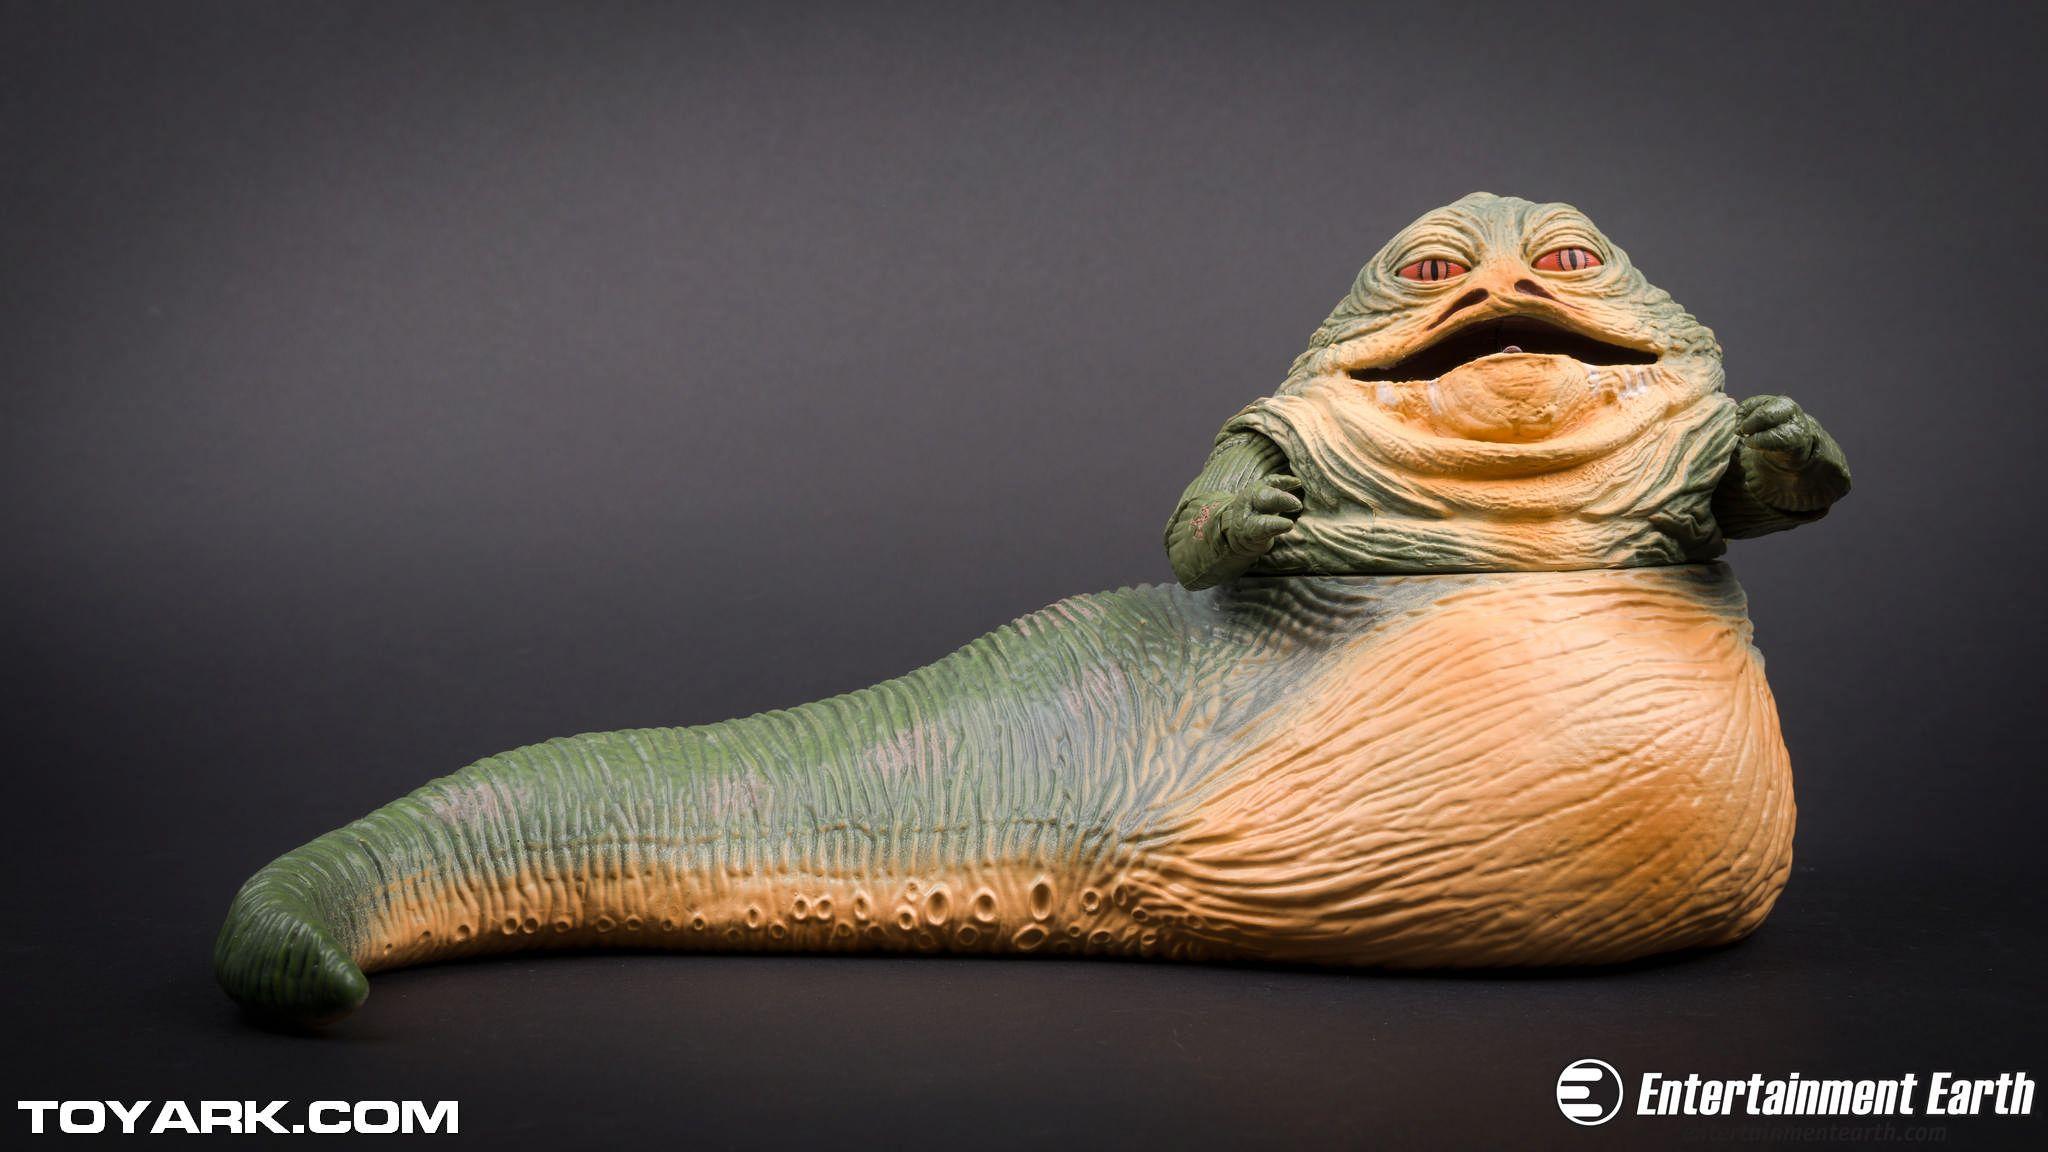 Star Wars Black Series Deluxe Jabba The Hutt Gallery.